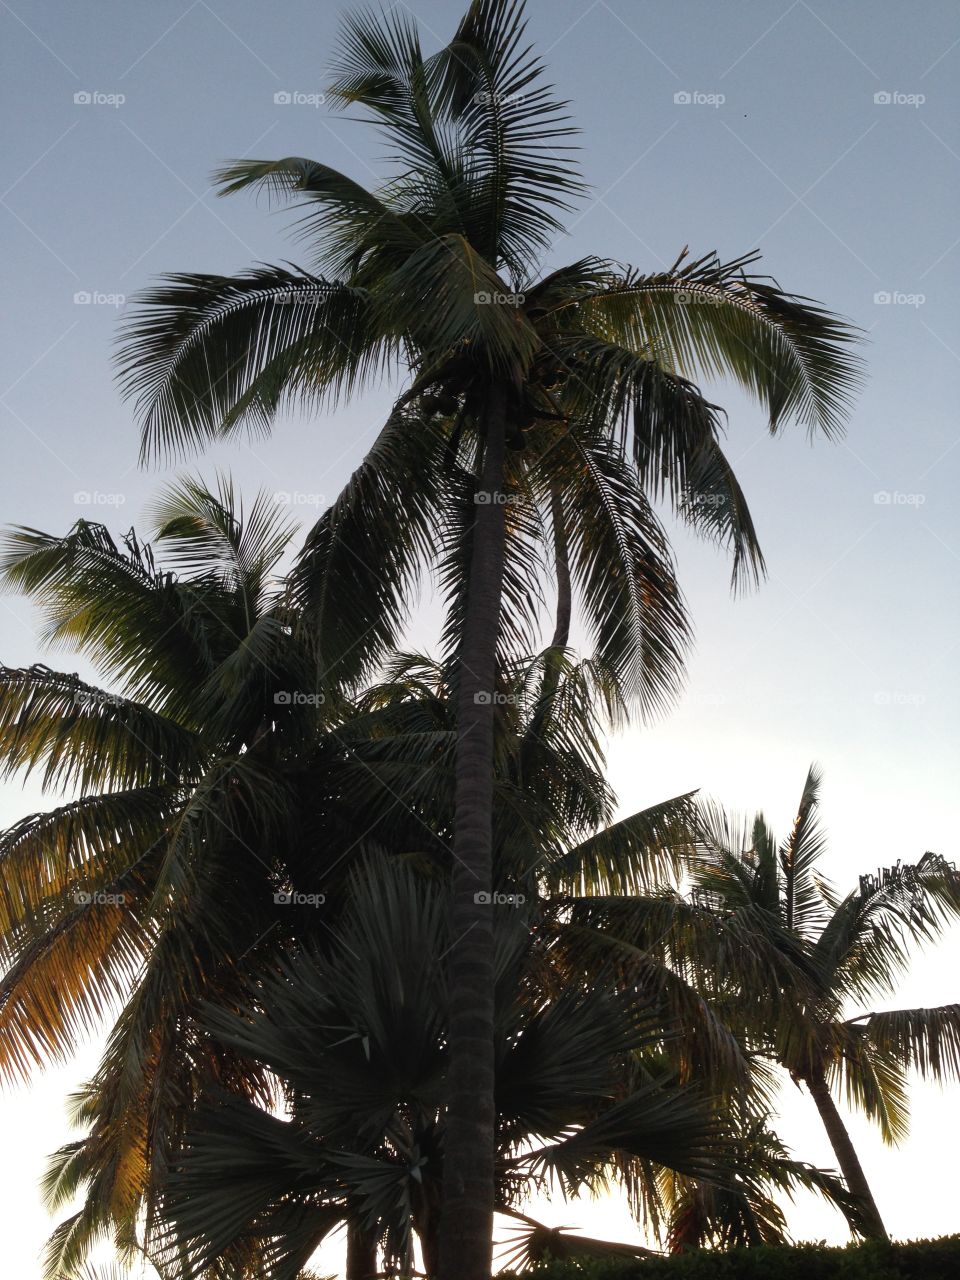 Palm trees on a sunset in Nevis, Saint Kitts